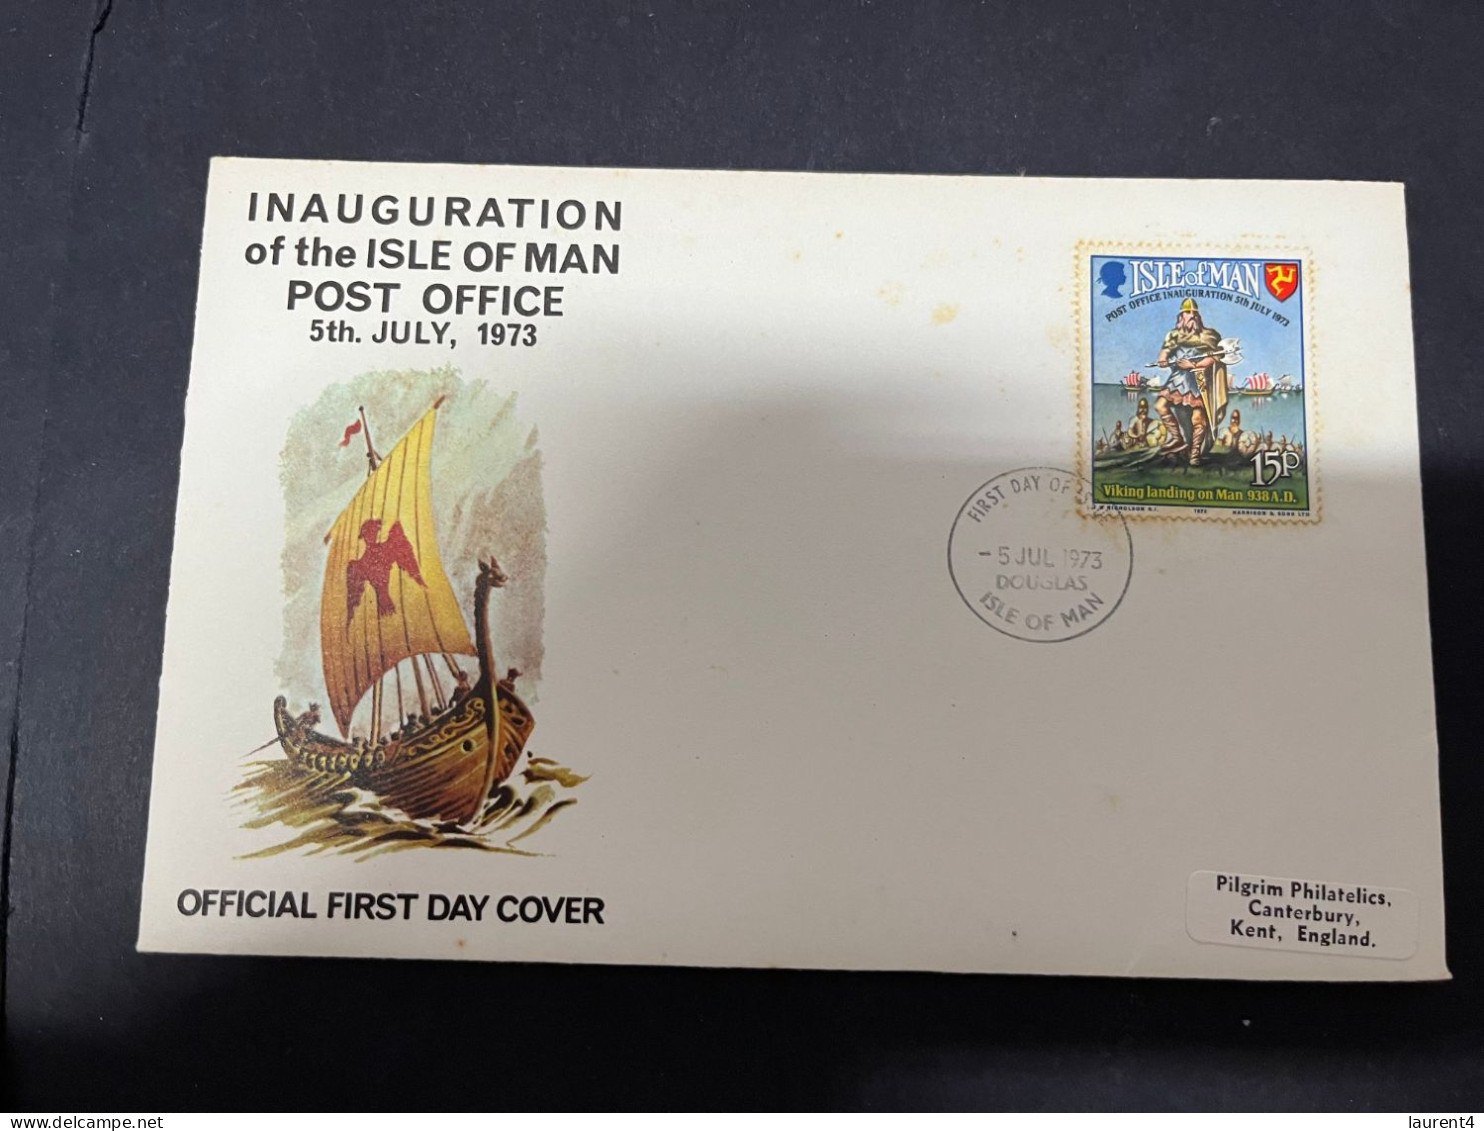 8-5-2024 (4 Z 29)  FDC (Isle Of Man) Europa 1973 - Post Office Inauguaration ( Some Rust ) (19 X 10,5 Cm) With Insert - Man (Eiland)